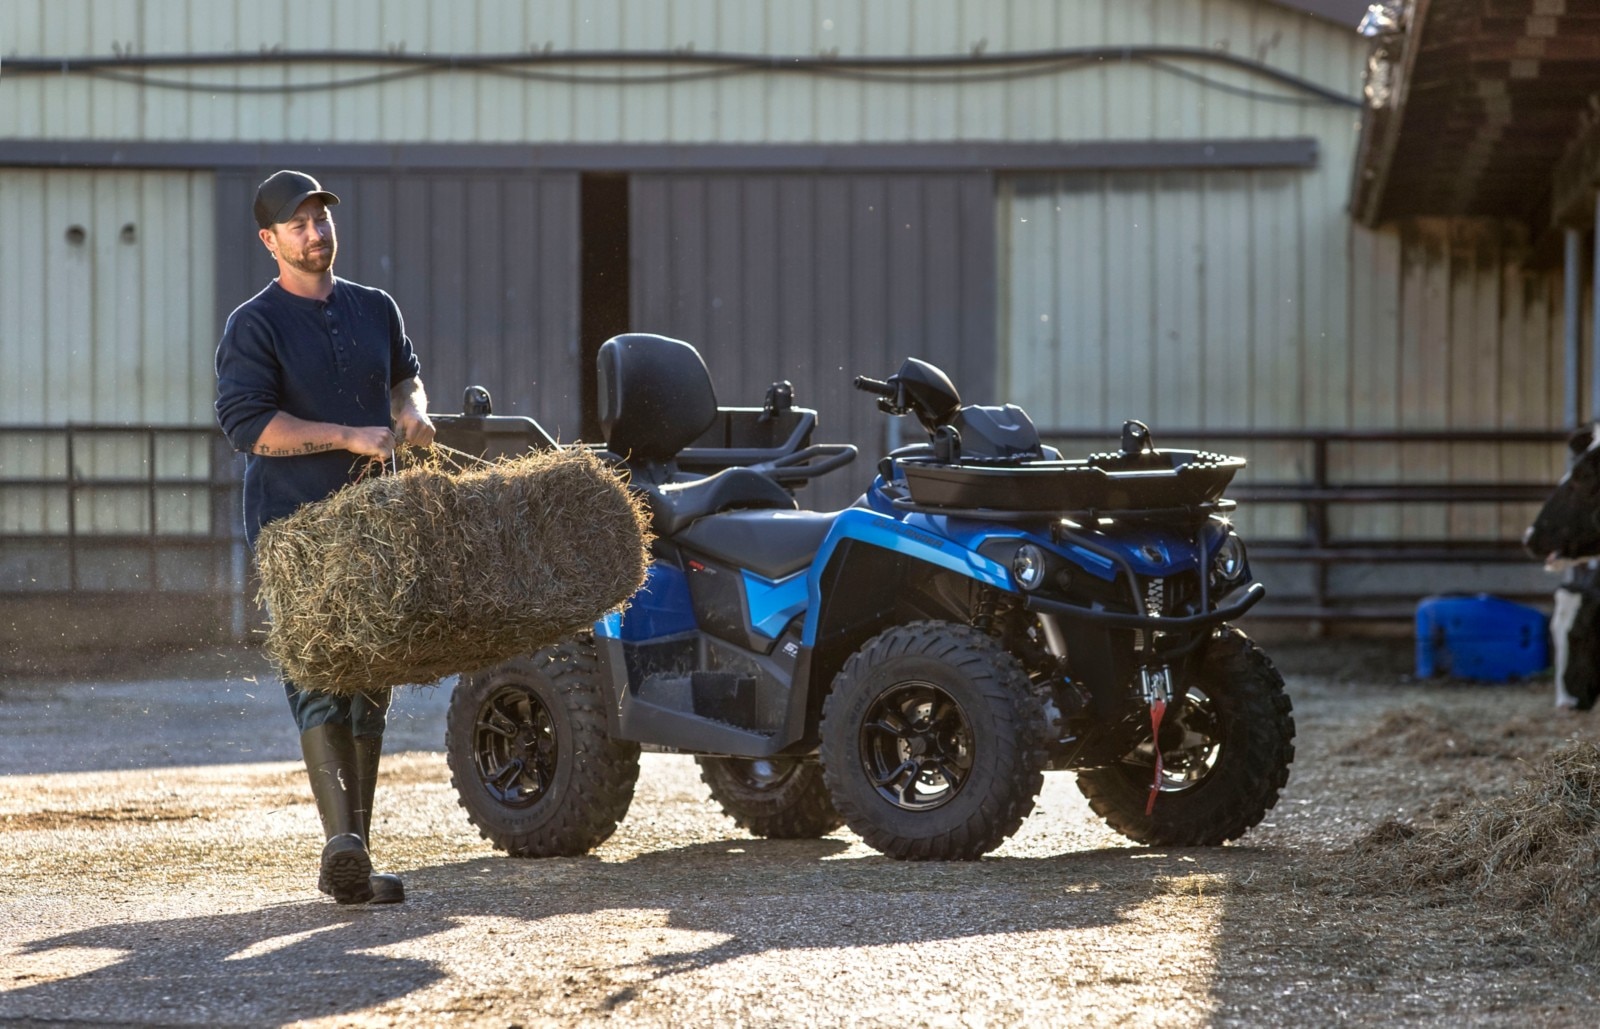 A farmer holding a bale of hay in front of Can-Am ATV